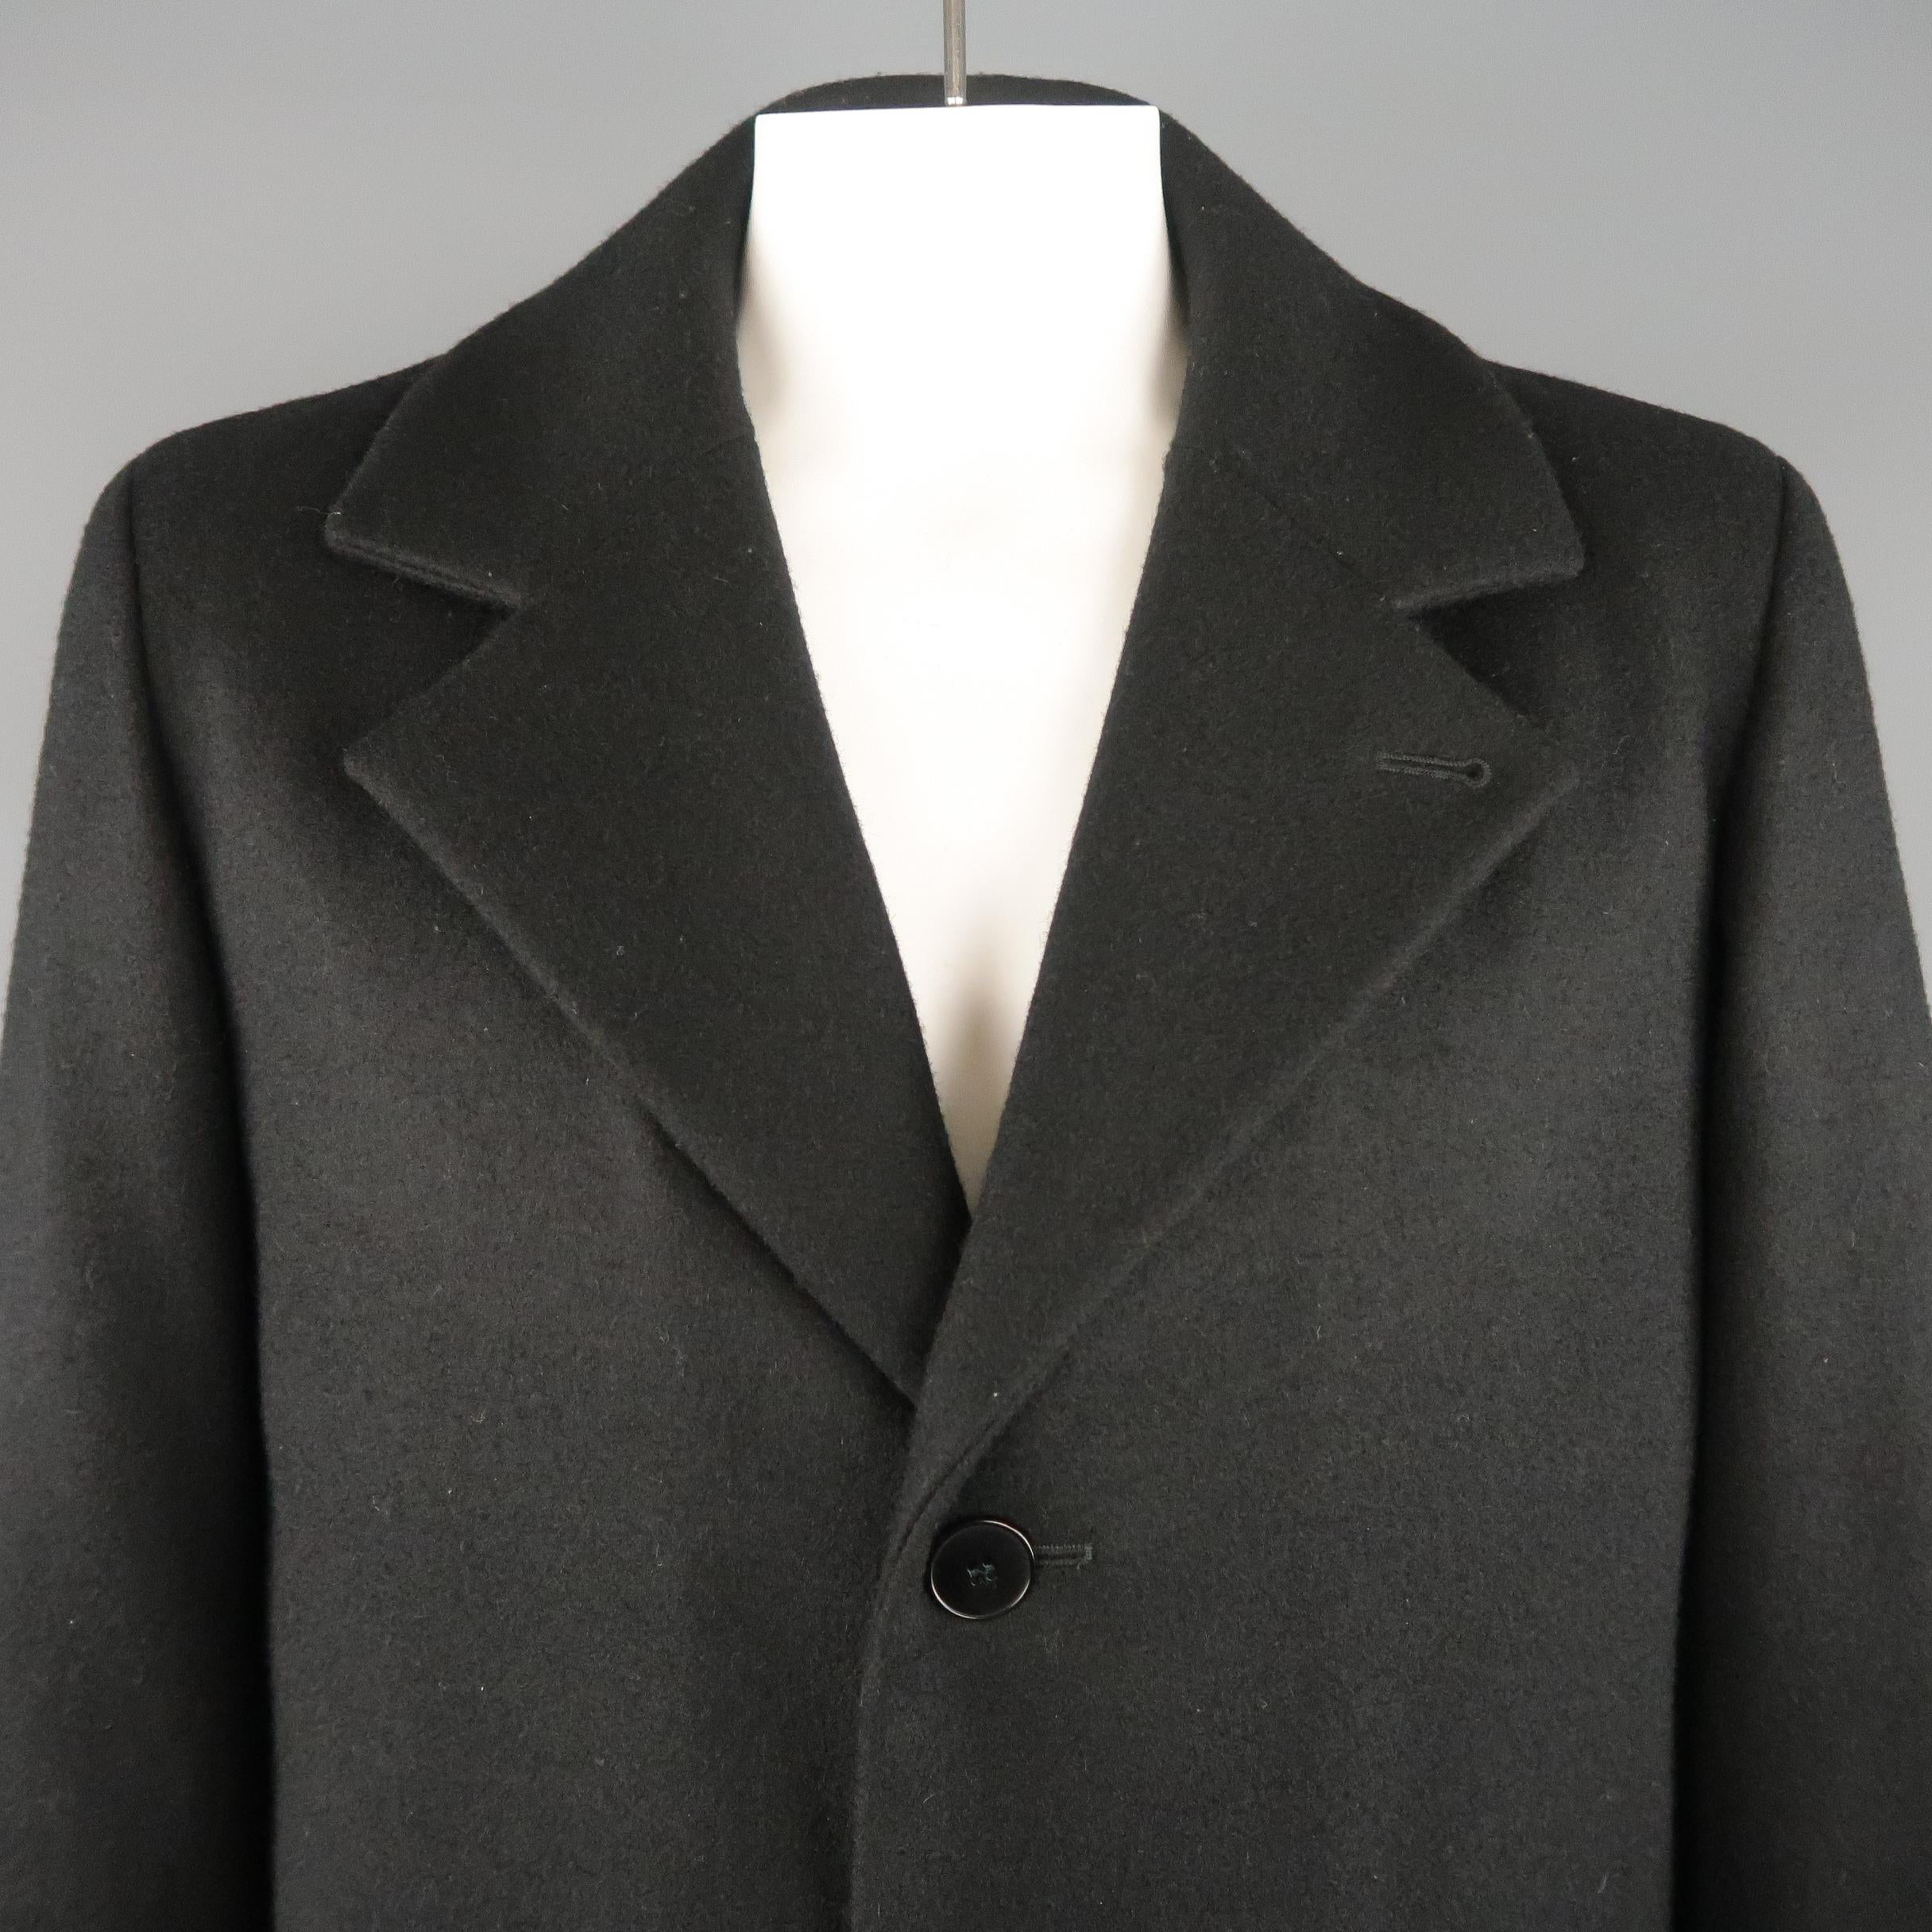 AGNES B. pea coat comes in black wool with a pointed lapel, single breasted, three button closure, slanted pockets, and quilted liner. Made in France.
 
Excellent Pre-Owned Condition.
Marked: IT 54
 
Measurements:
 
Shoulder: 20 in.
Chest: 48